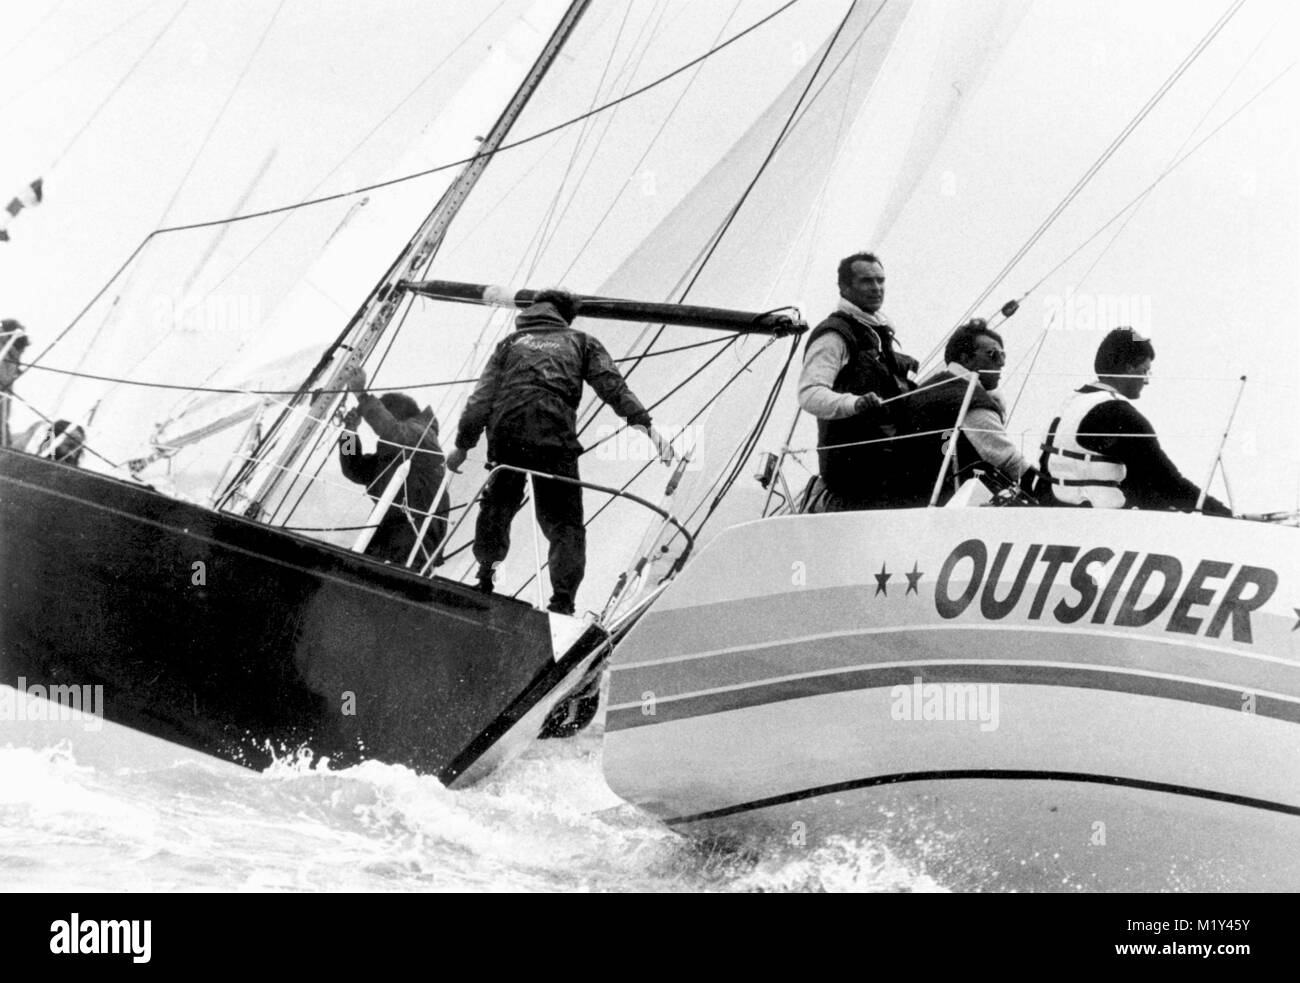 AJAXNETPHOTO. AUGUST 1983. COWES, ENGLAND. - ADMIRAL'S CUP, RACE 4 (3RD INSHORE) - GERMAN ENTRY OUTSIDER (T.HANSEN) SQUEEZES AHEAD OF THE FRENCH ENTRY PASSION (J.L.FOBRY) AS THEY APPROACH THE WEATHER MARK.  PHOTO:JONATHAN EASTLAND/AJAX REF:ARCPR 1983 Stock Photo